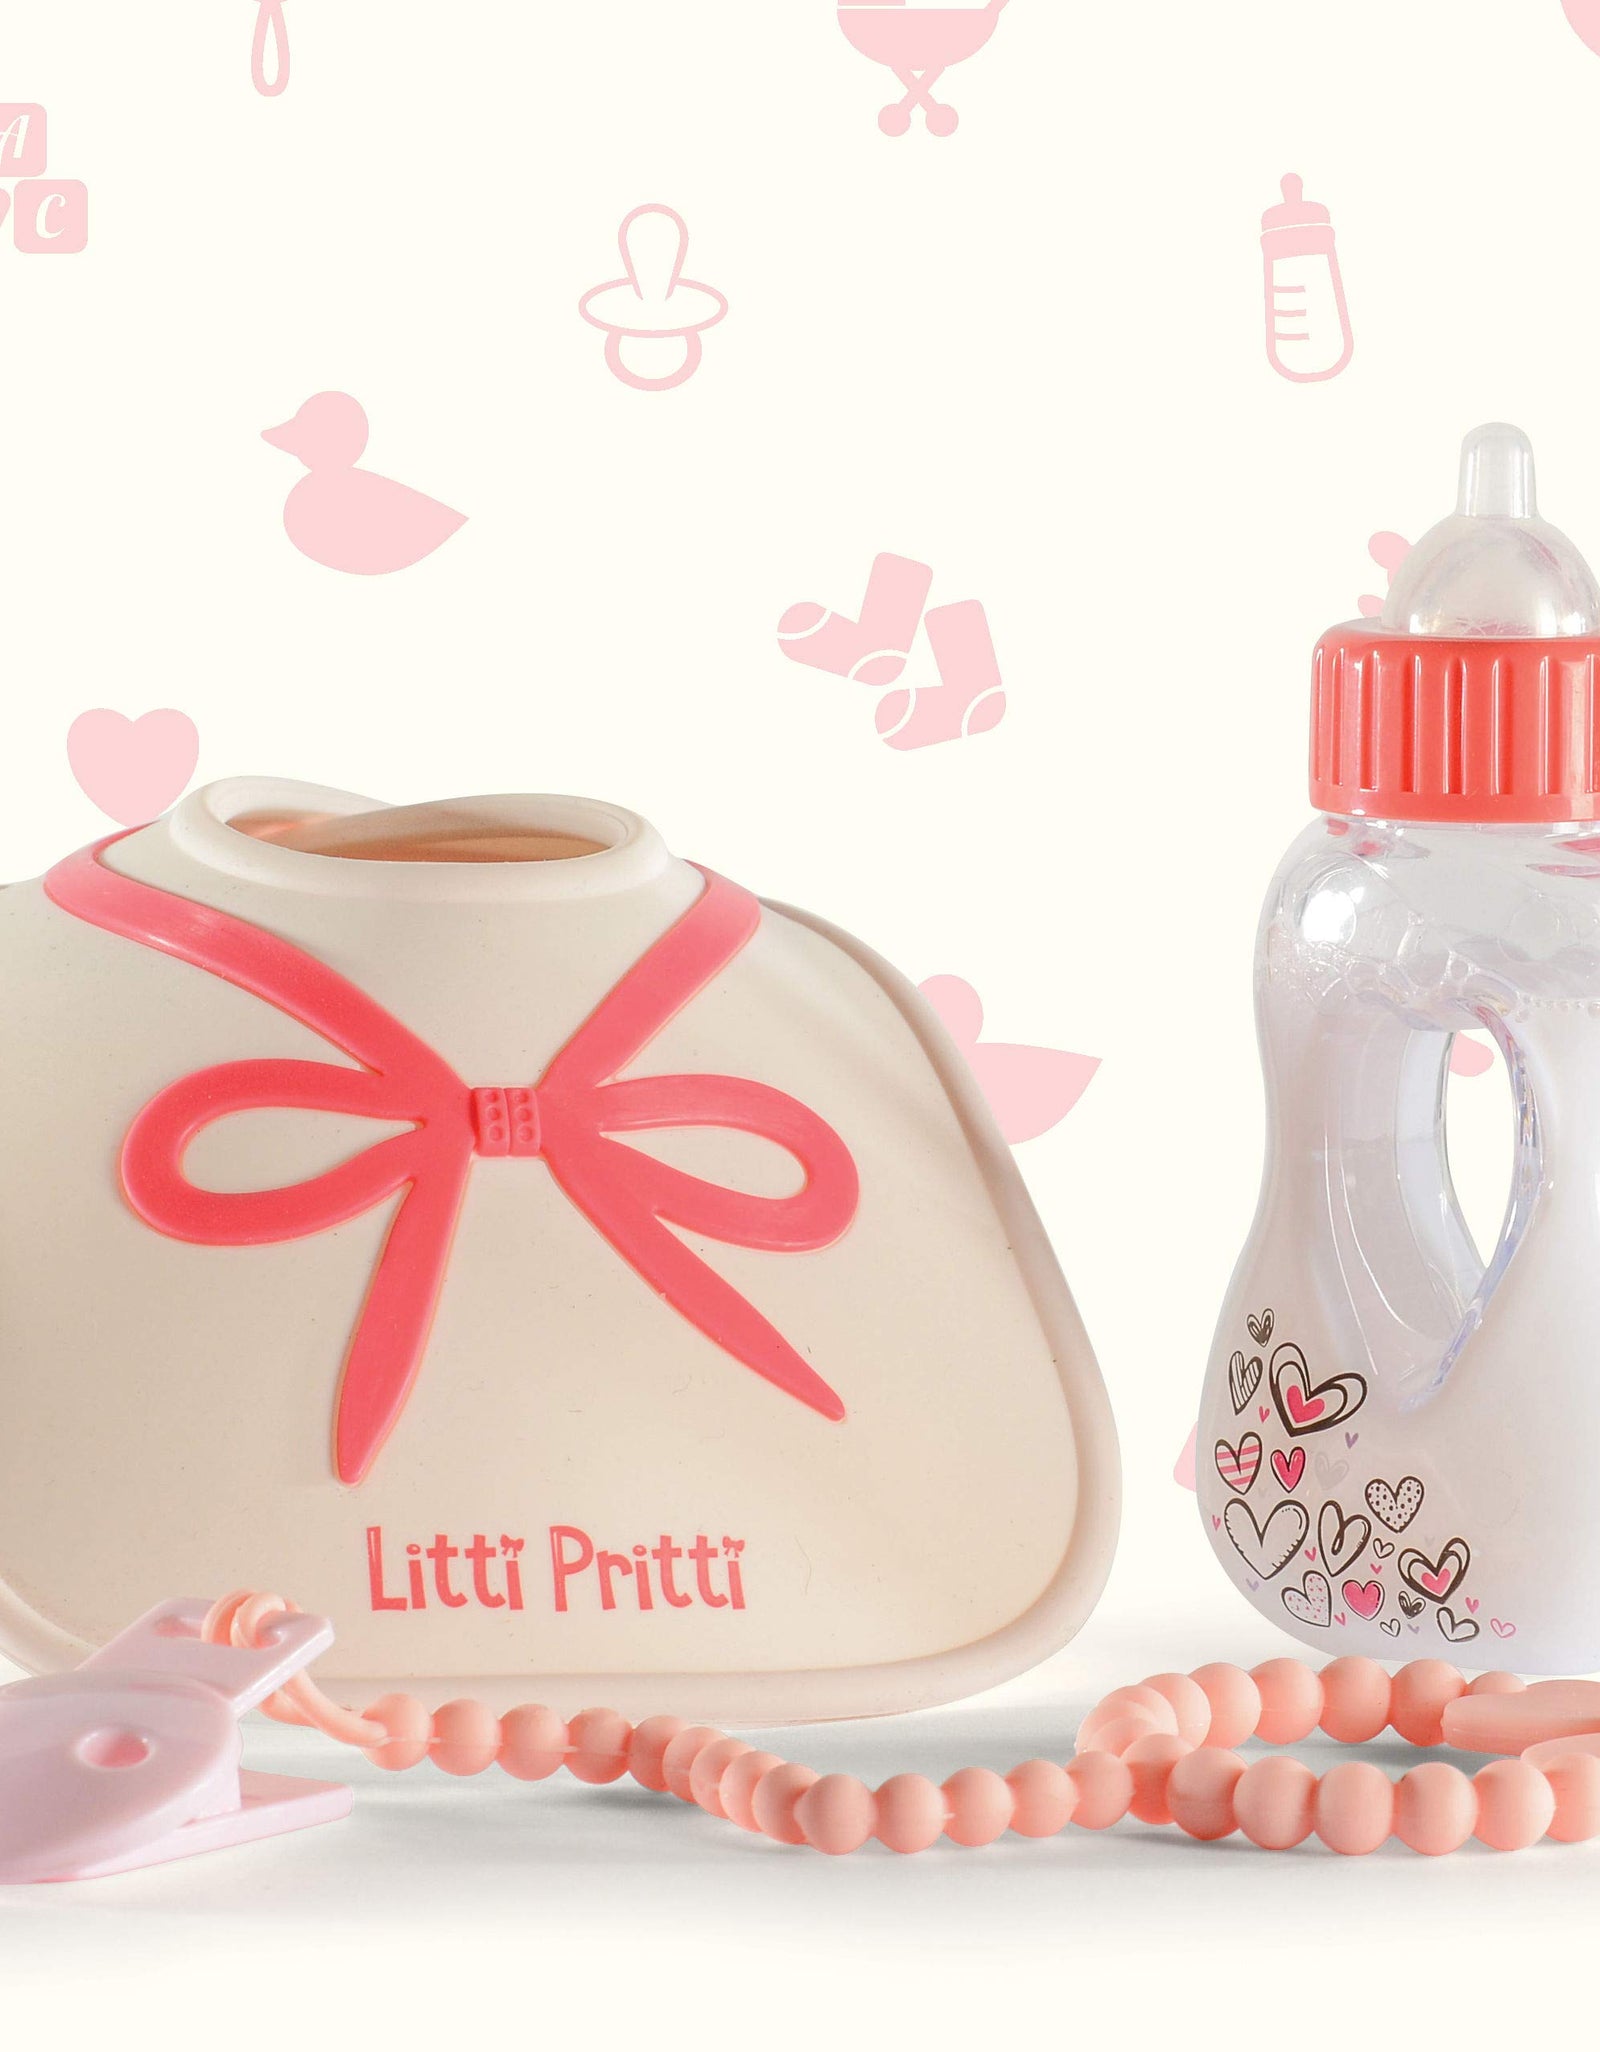 Litti Pritti Baby Doll Accessories - 9 Piece Premier Playtime Set for Baby Dolls - Diaper Bag Set Includes Fabric Diapers, Magic Bottle, Wipes & More